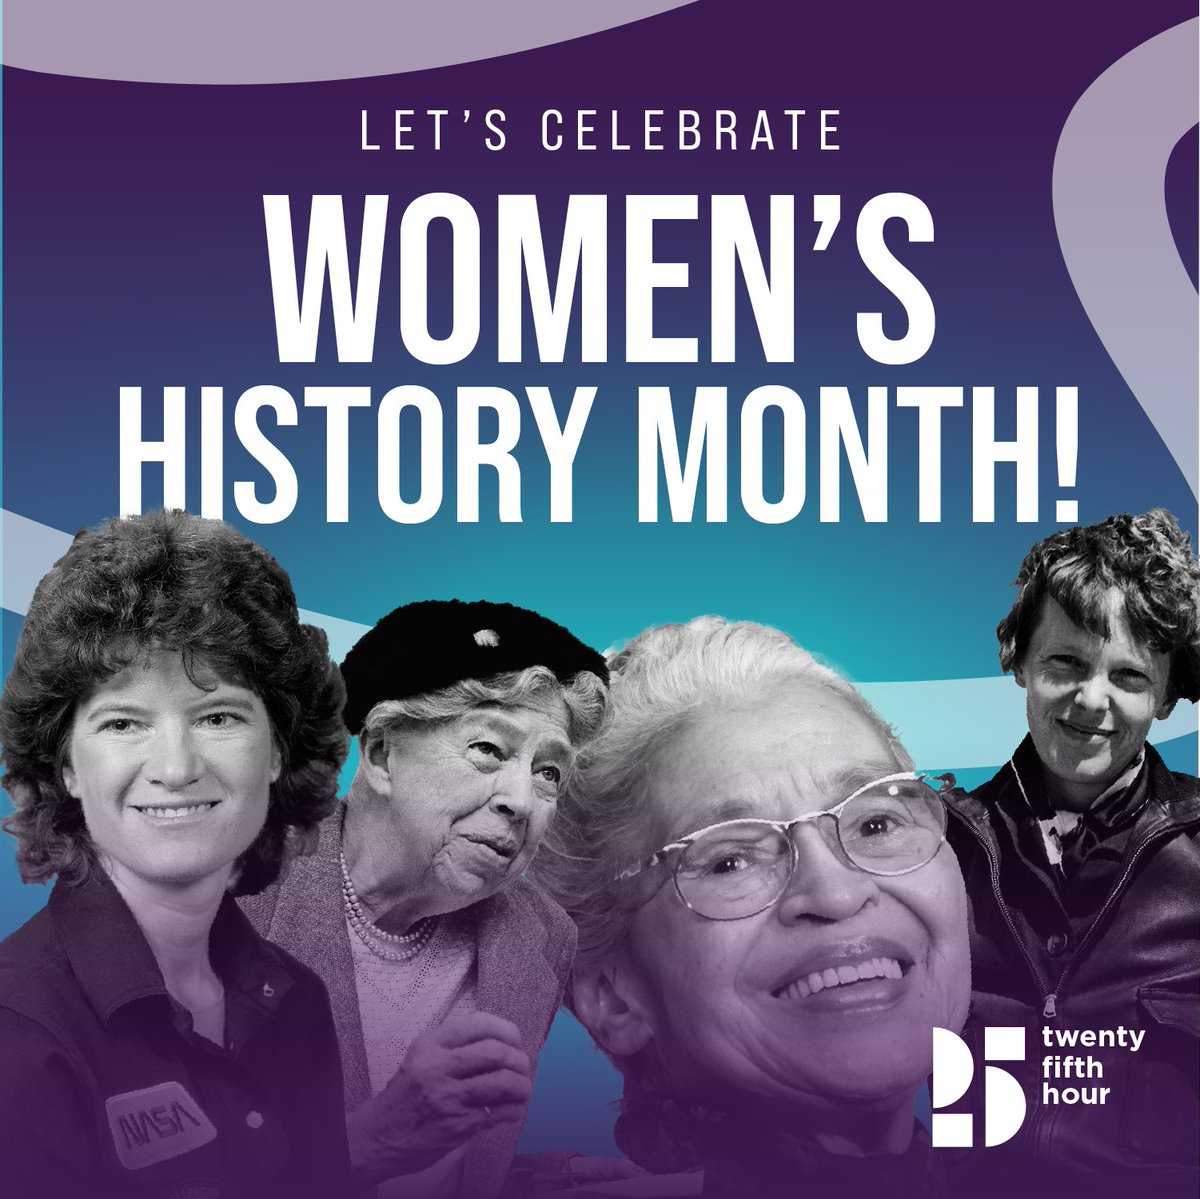 March is Women's History Month! To celebrate, we are going to feature a strong leader each week from our very own female-owned, female-led company! #WomensHistoryMonth